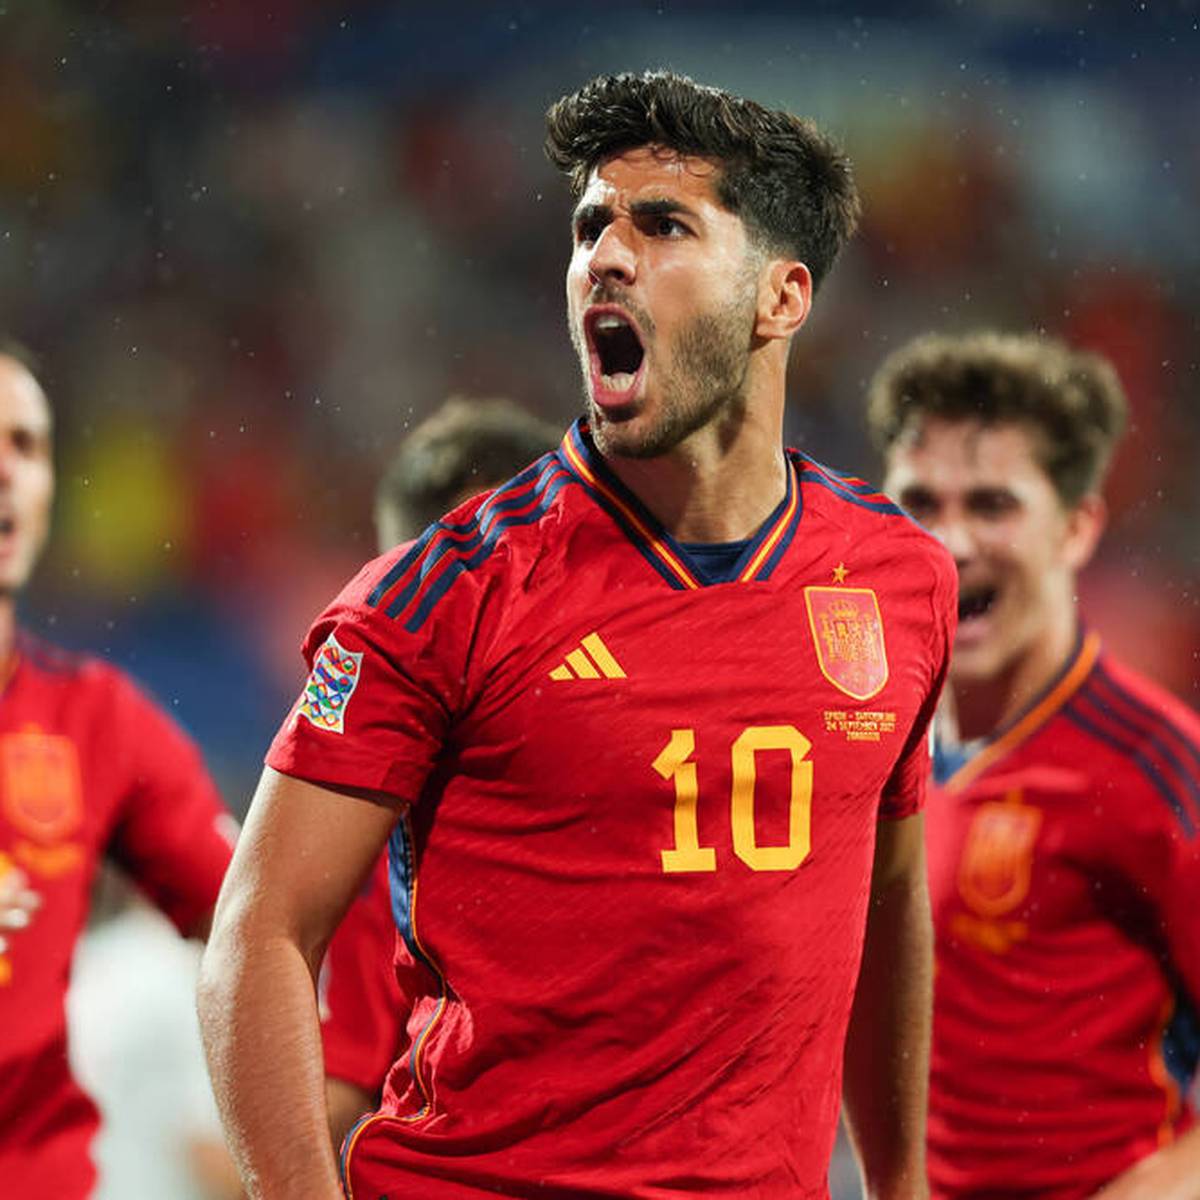 Spain v Switzerland: UEFA Nations League - League Path Group 2 Marco Asensio of Spain during the UEFA Nations League League A Group 2 match between Spain and Switzerland at La Romareda on September 24, 2022 in Zaragoza, Spain( Zaragoza Spain PUBLICATIONxNOTxINxFRA Copyright: xDAXxImagesx originalFilename:daximages-uefanati220924_np6hC.jpg